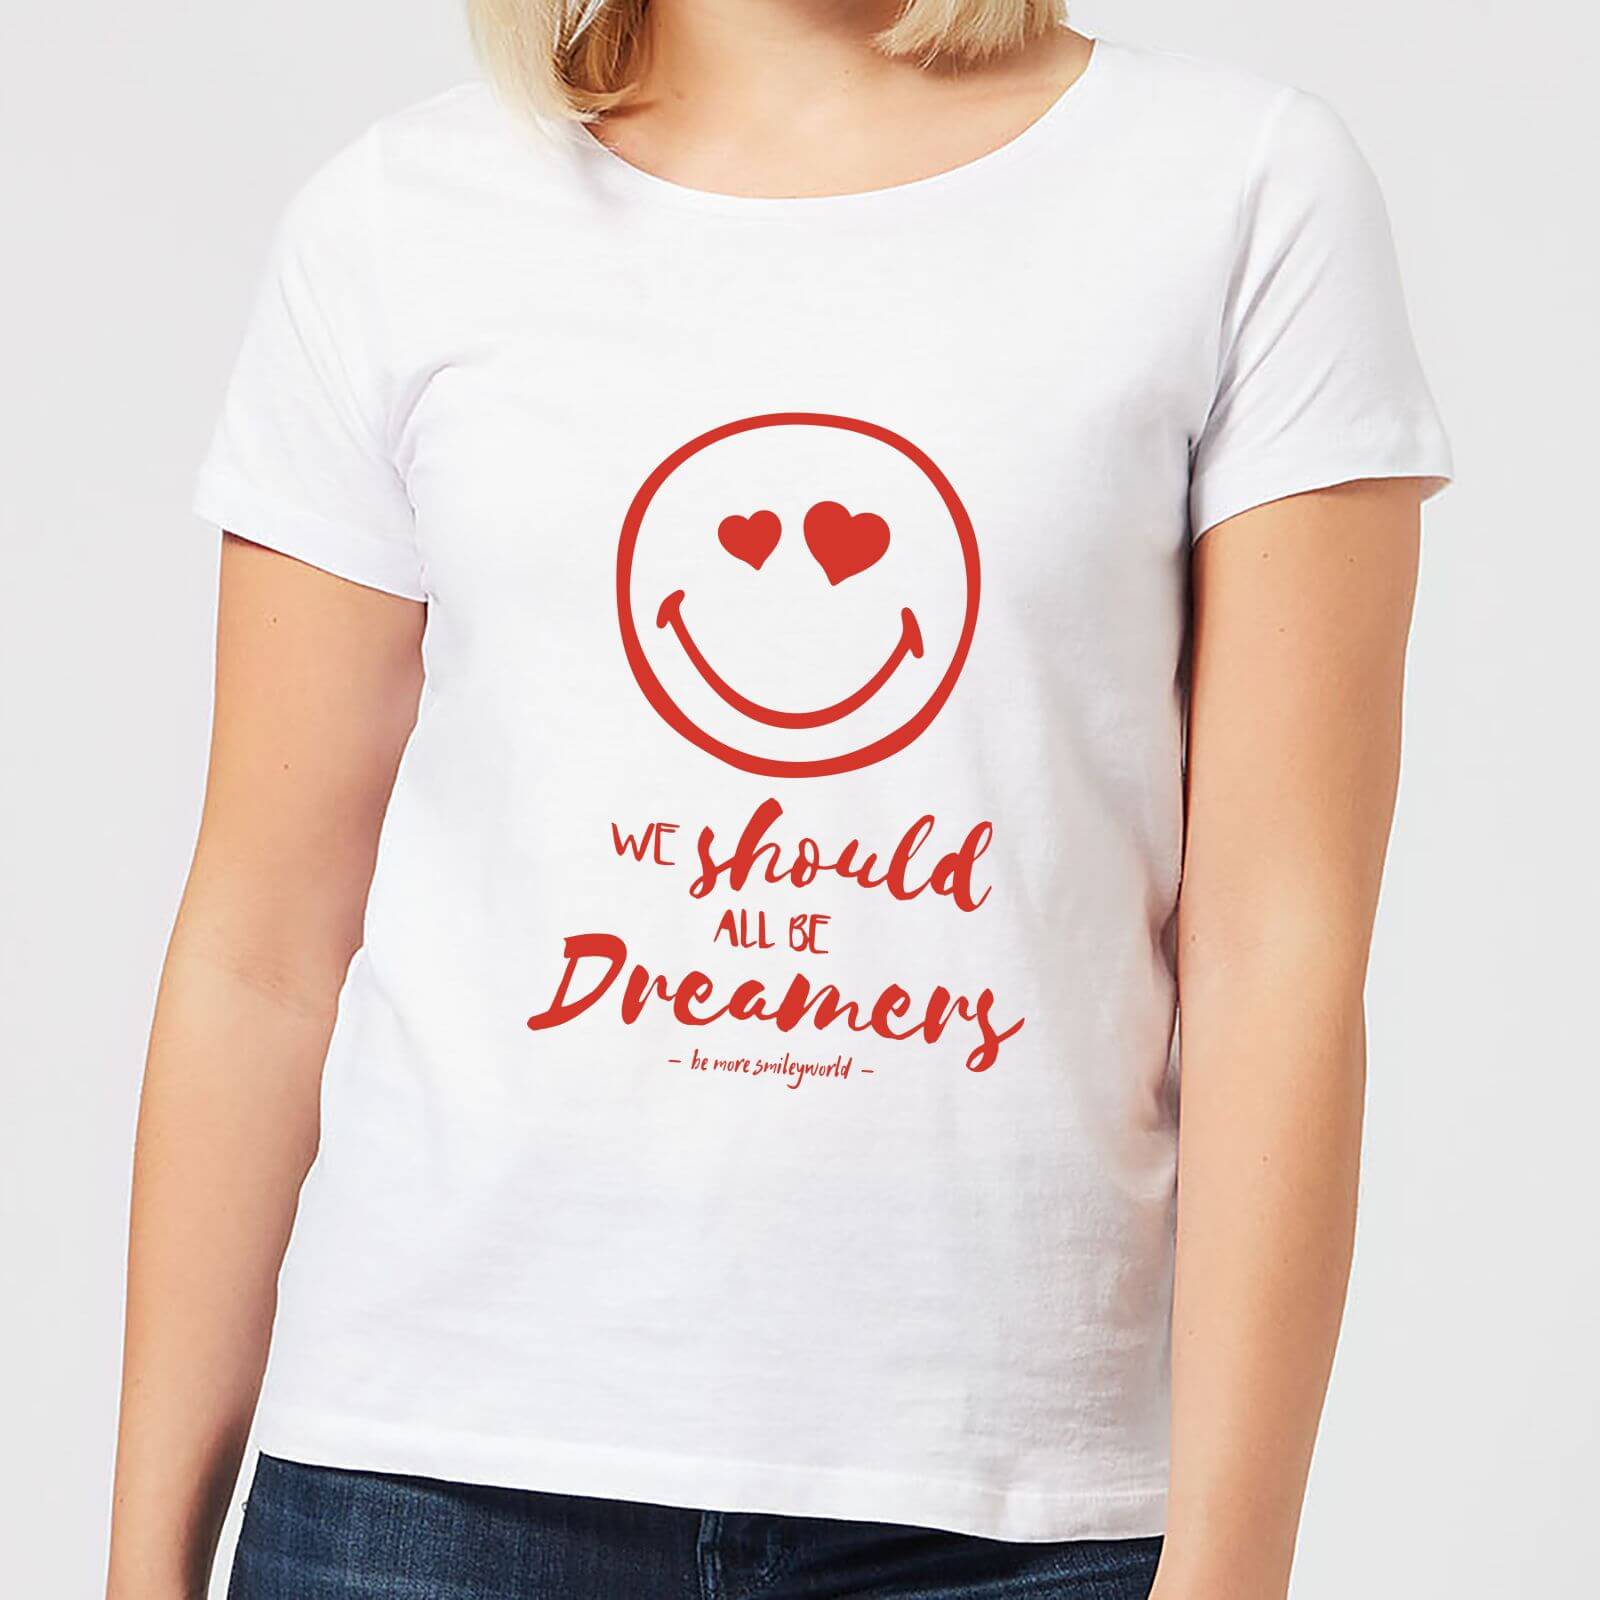 We Should All Be Dreamers Women's T-Shirt - White - S - White